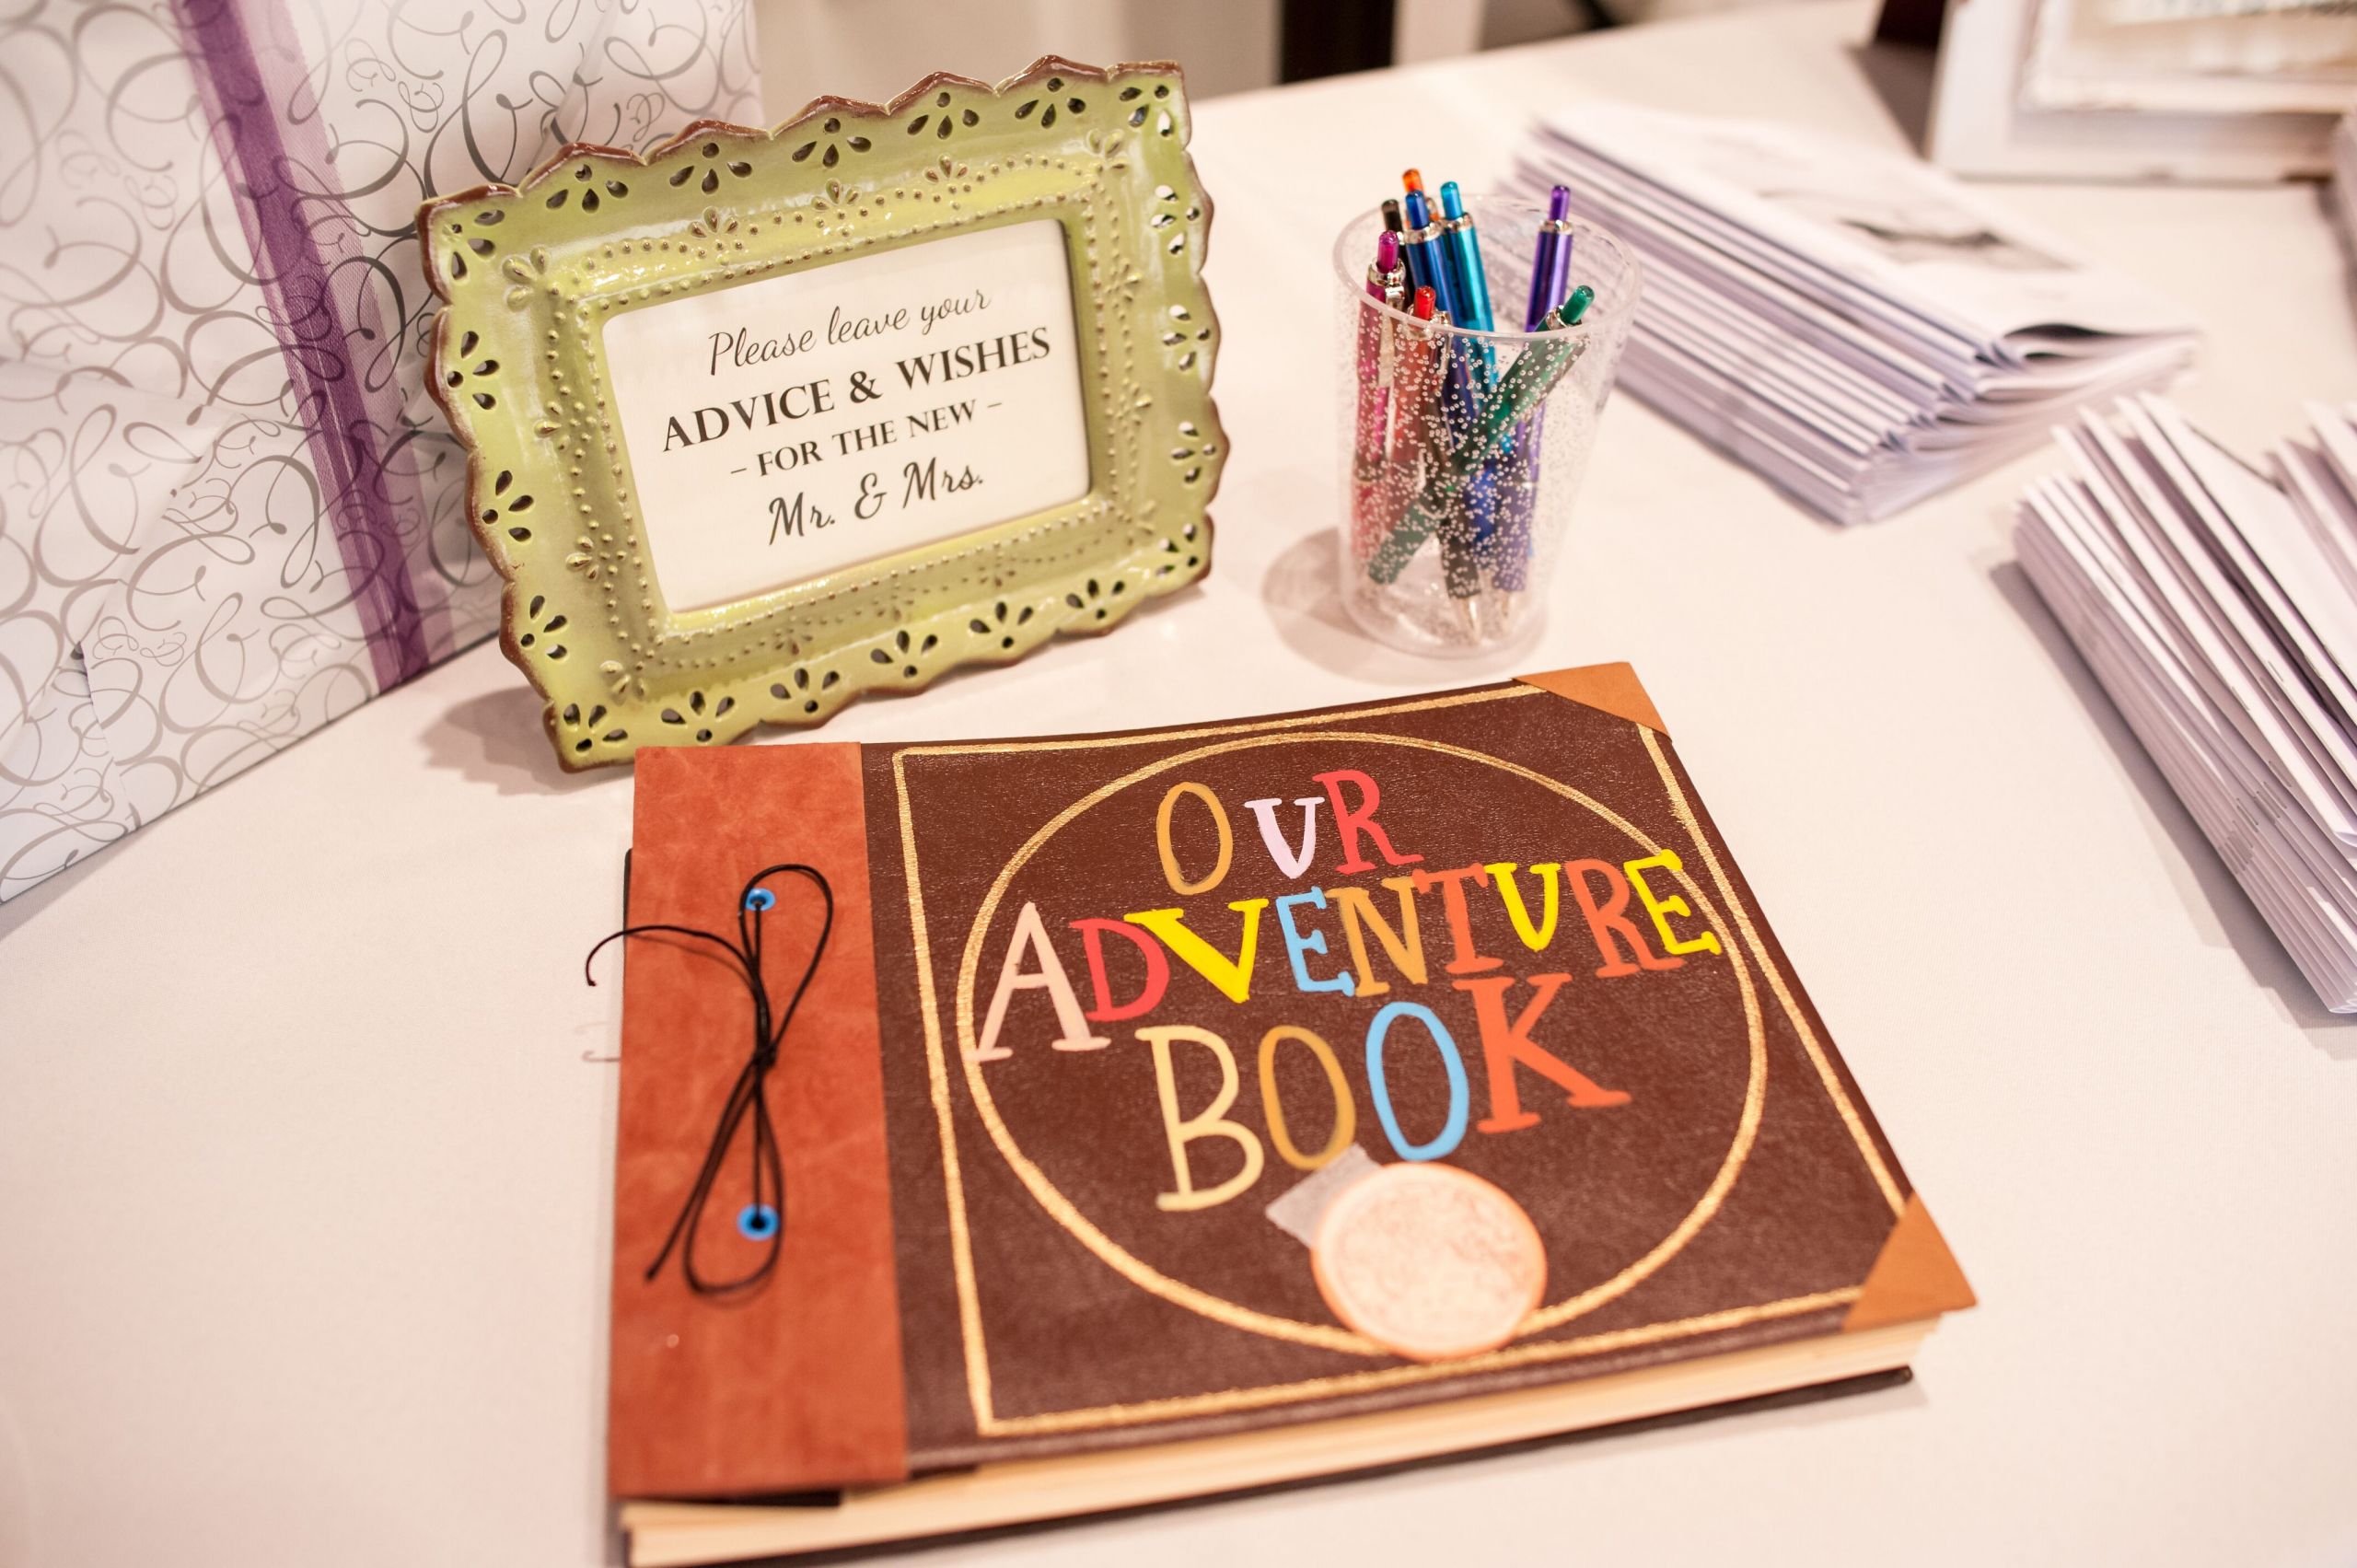 Up Wedding Guest Book
 Up Inspired Adventure Book Guest Book